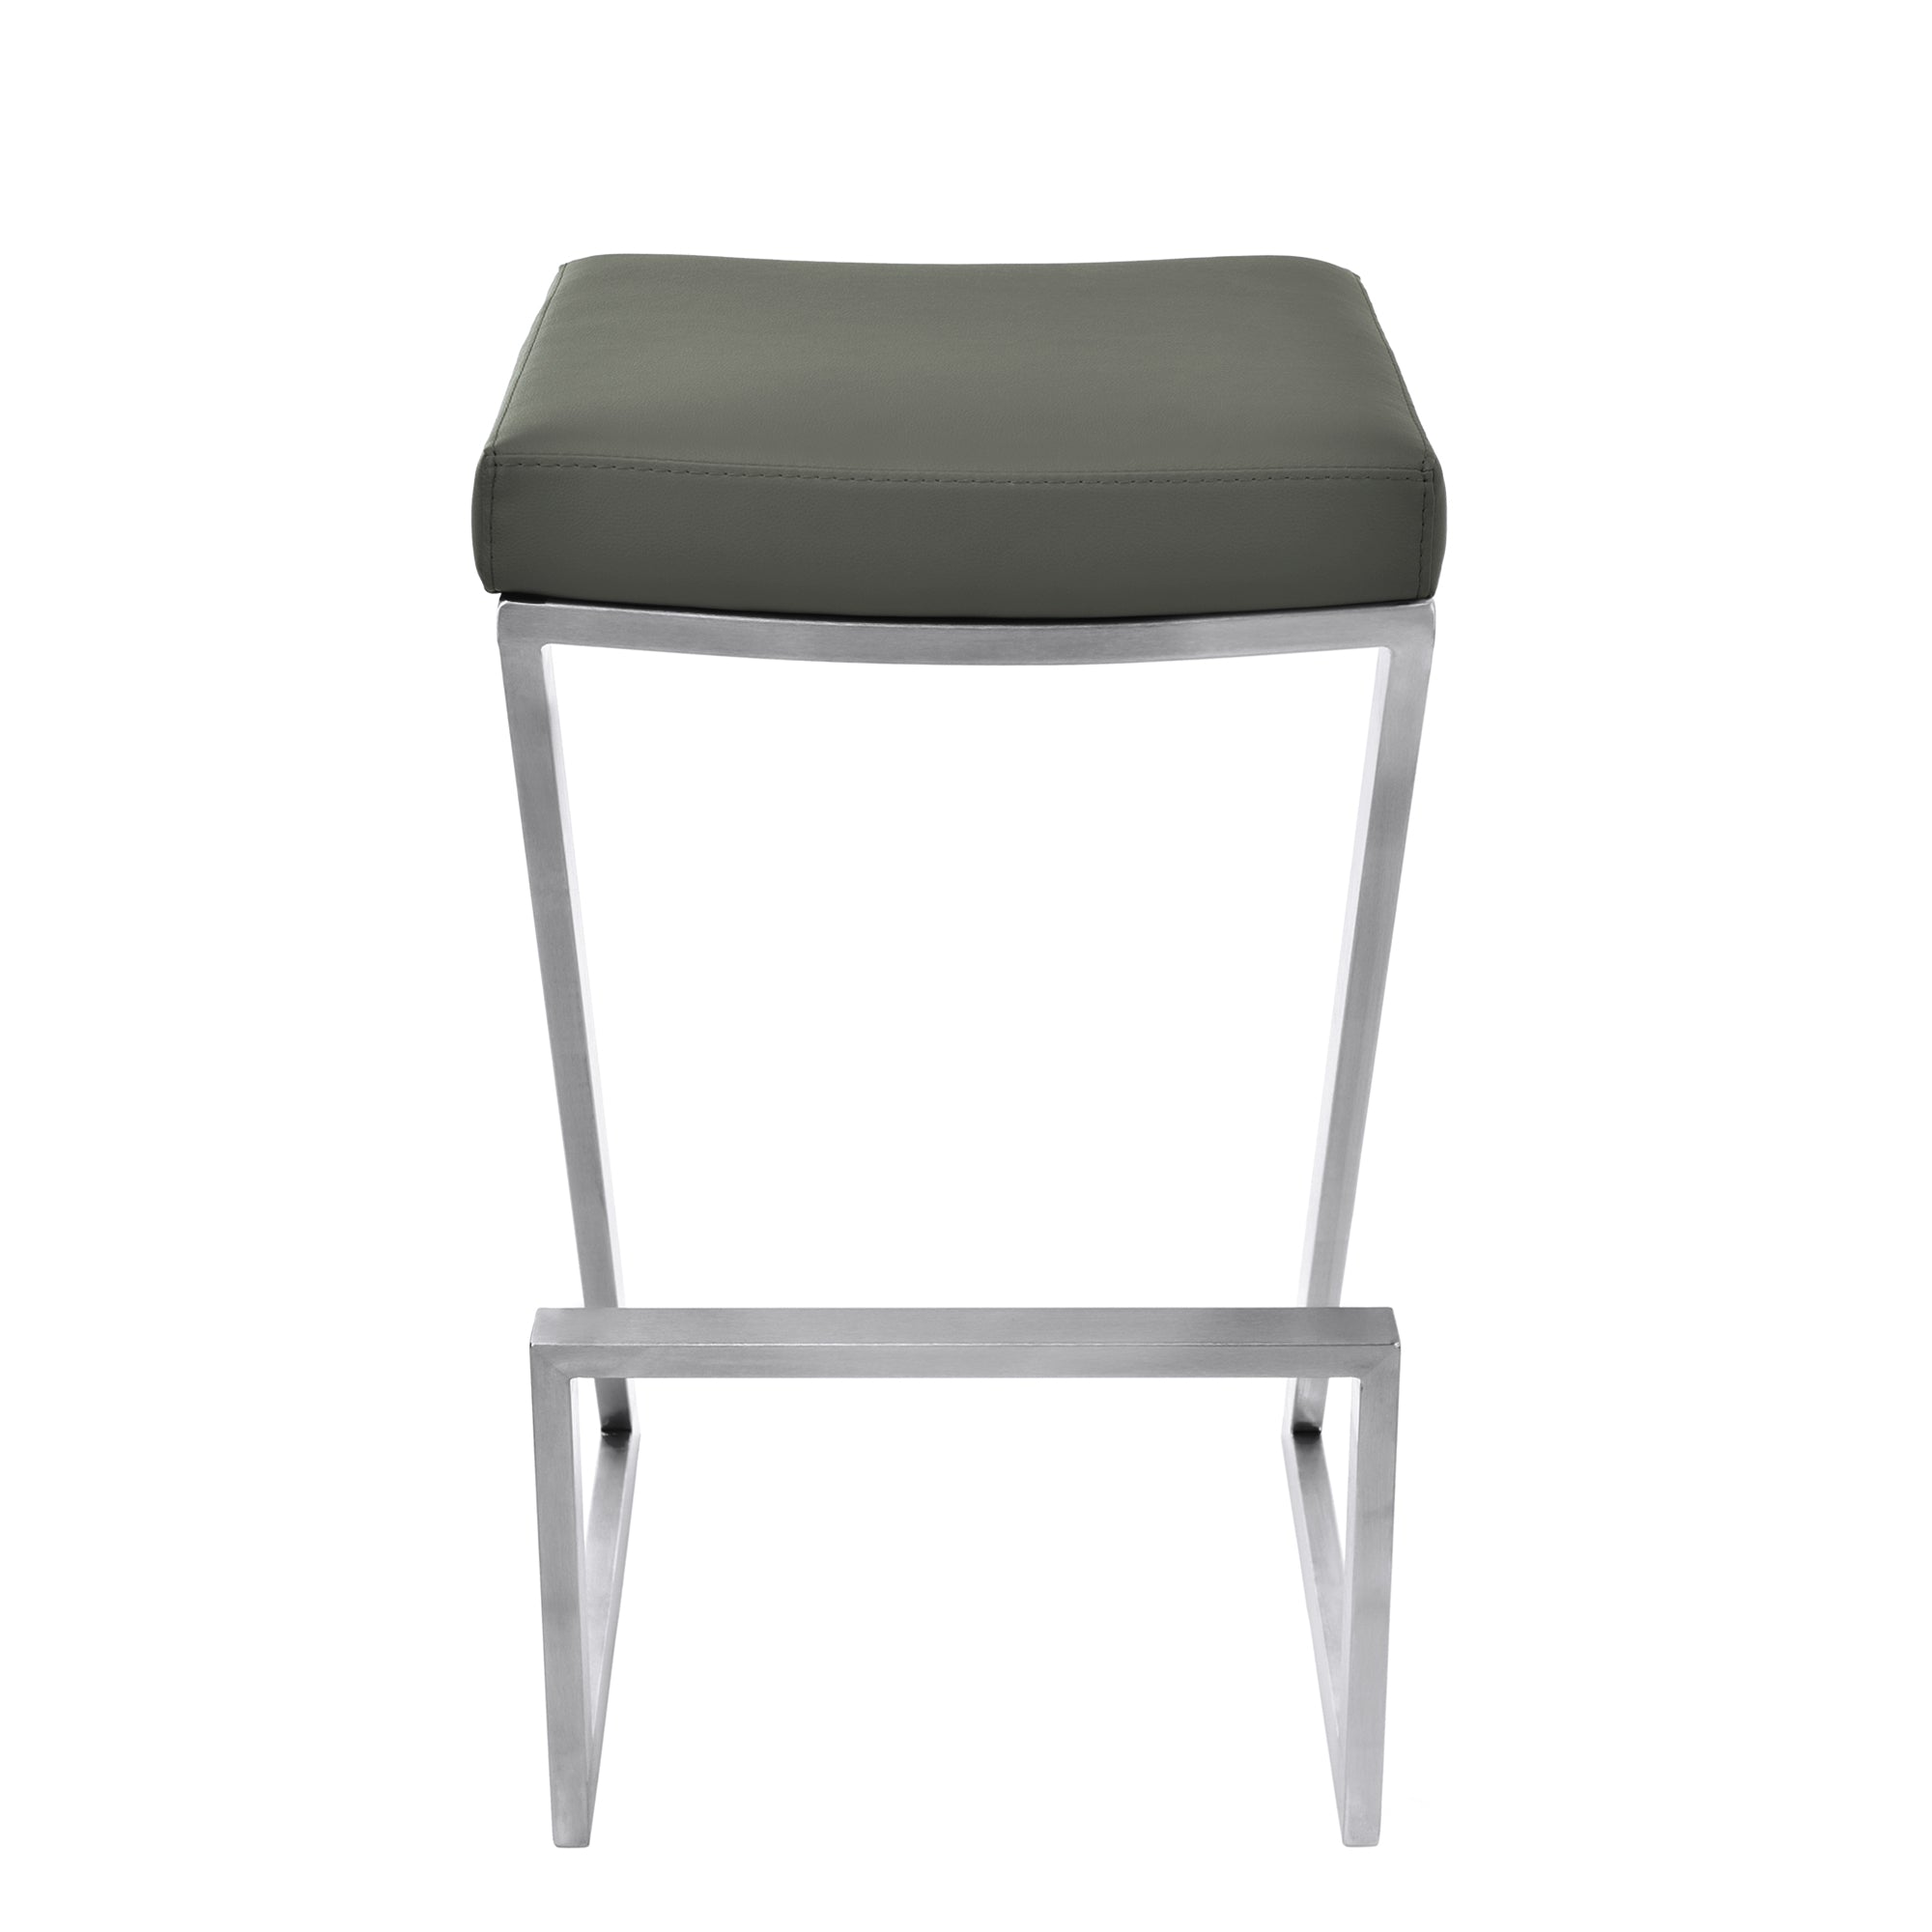 Armen Living Atlantis 26" Counter Height Barstool in Grey Faux Leather and Brushed Stainless Steel Finish